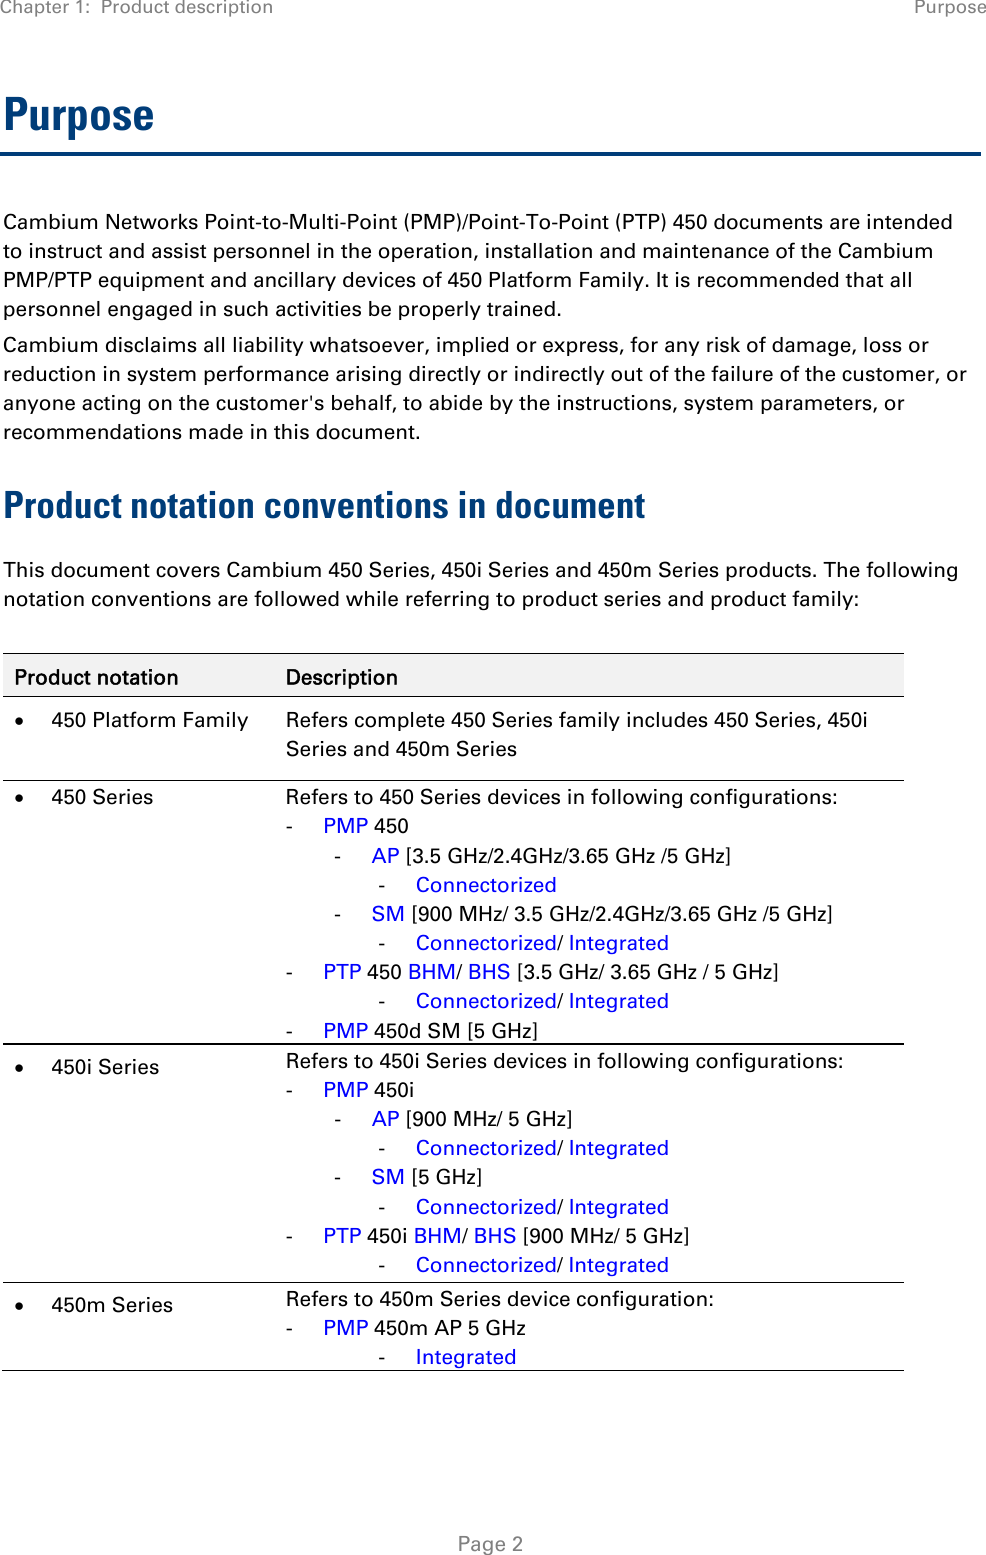 Chapter 1:  Product description  Purpose   Page 2 Purpose Cambium Networks Point-to-Multi-Point (PMP)/Point-To-Point (PTP) 450 documents are intended to instruct and assist personnel in the operation, installation and maintenance of the Cambium PMP/PTP equipment and ancillary devices of 450 Platform Family. It is recommended that all personnel engaged in such activities be properly trained. Cambium disclaims all liability whatsoever, implied or express, for any risk of damage, loss or reduction in system performance arising directly or indirectly out of the failure of the customer, or anyone acting on the customer&apos;s behalf, to abide by the instructions, system parameters, or recommendations made in this document. Product notation conventions in document This document covers Cambium 450 Series, 450i Series and 450m Series products. The following notation conventions are followed while referring to product series and product family:  Product notation  Description  450 Platform Family  Refers complete 450 Series family includes 450 Series, 450i Series and 450m Series  450 Series  Refers to 450 Series devices in following configurations: - PMP 450  - AP [3.5 GHz/2.4GHz/3.65 GHz /5 GHz]  - Connectorized - SM [900 MHz/ 3.5 GHz/2.4GHz/3.65 GHz /5 GHz] - Connectorized/ Integrated - PTP 450 BHM/ BHS [3.5 GHz/ 3.65 GHz / 5 GHz] - Connectorized/ Integrated - PMP 450d SM [5 GHz]  450i Series  Refers to 450i Series devices in following configurations: - PMP 450i - AP [900 MHz/ 5 GHz] - Connectorized/ Integrated - SM [5 GHz] - Connectorized/ Integrated - PTP 450i BHM/ BHS [900 MHz/ 5 GHz] - Connectorized/ Integrated  450m Series  Refers to 450m Series device configuration: - PMP 450m AP 5 GHz - Integrated  